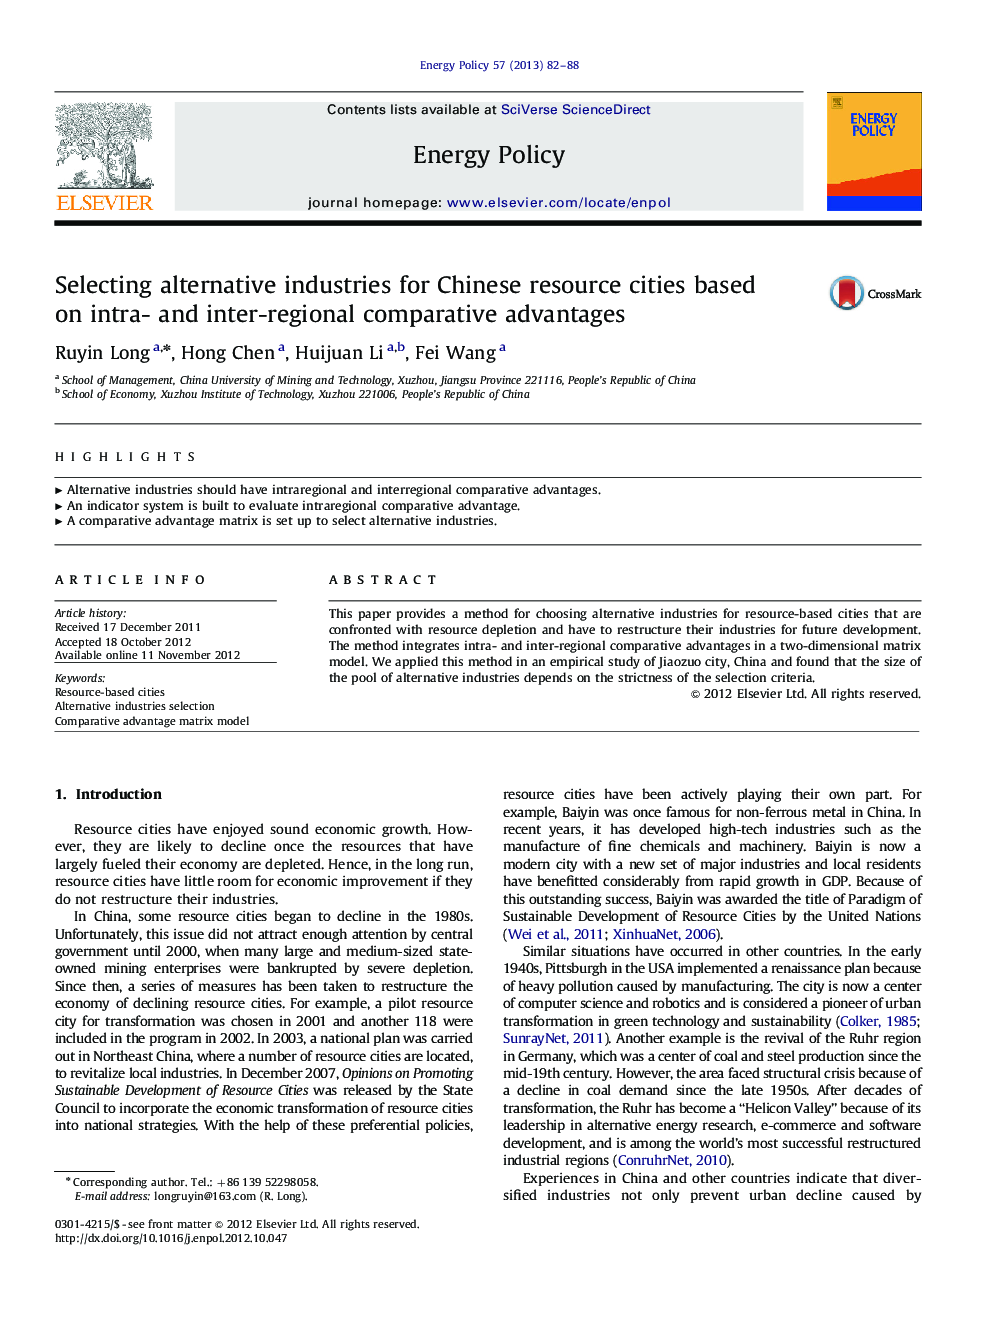 Selecting alternative industries for Chinese resource cities based on intra- and inter-regional comparative advantages